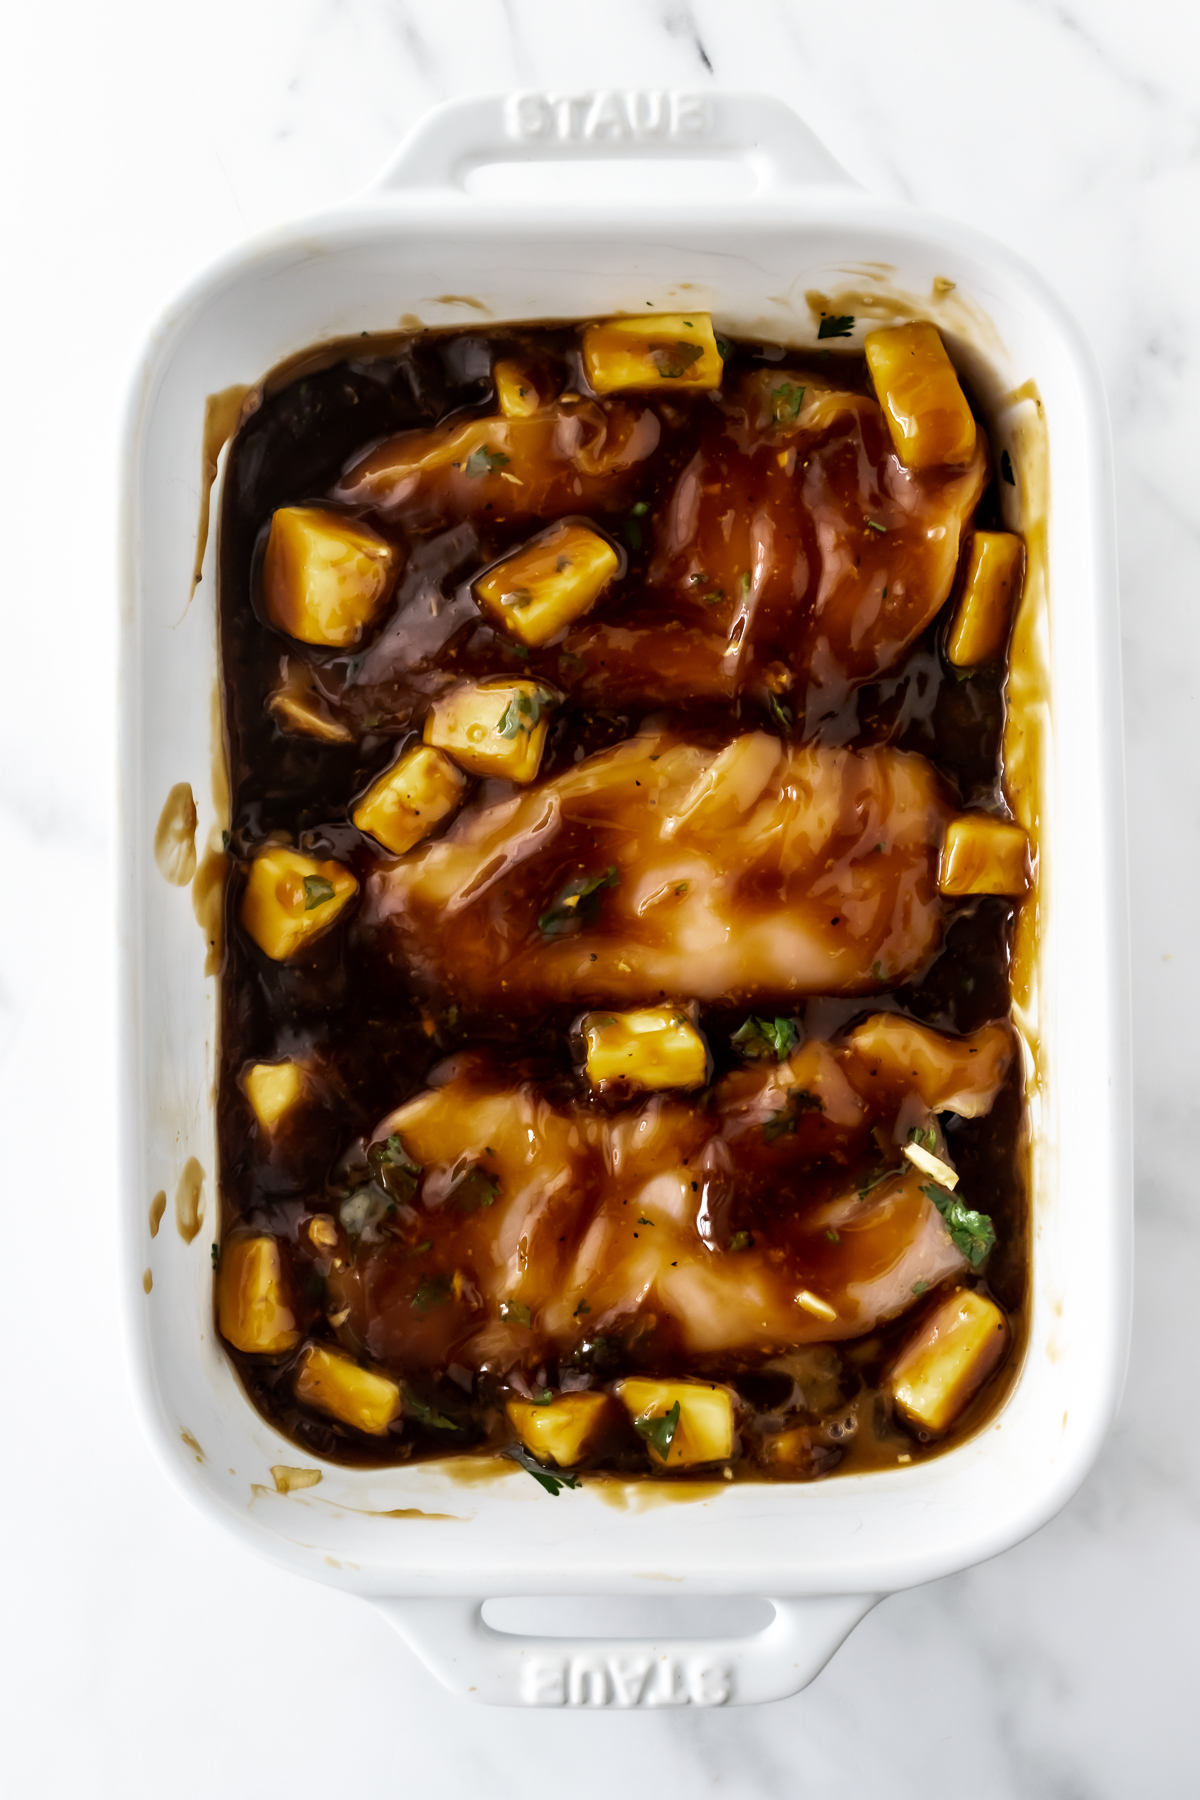 baked chicken teriyaki with pineapple in a white baking dish.